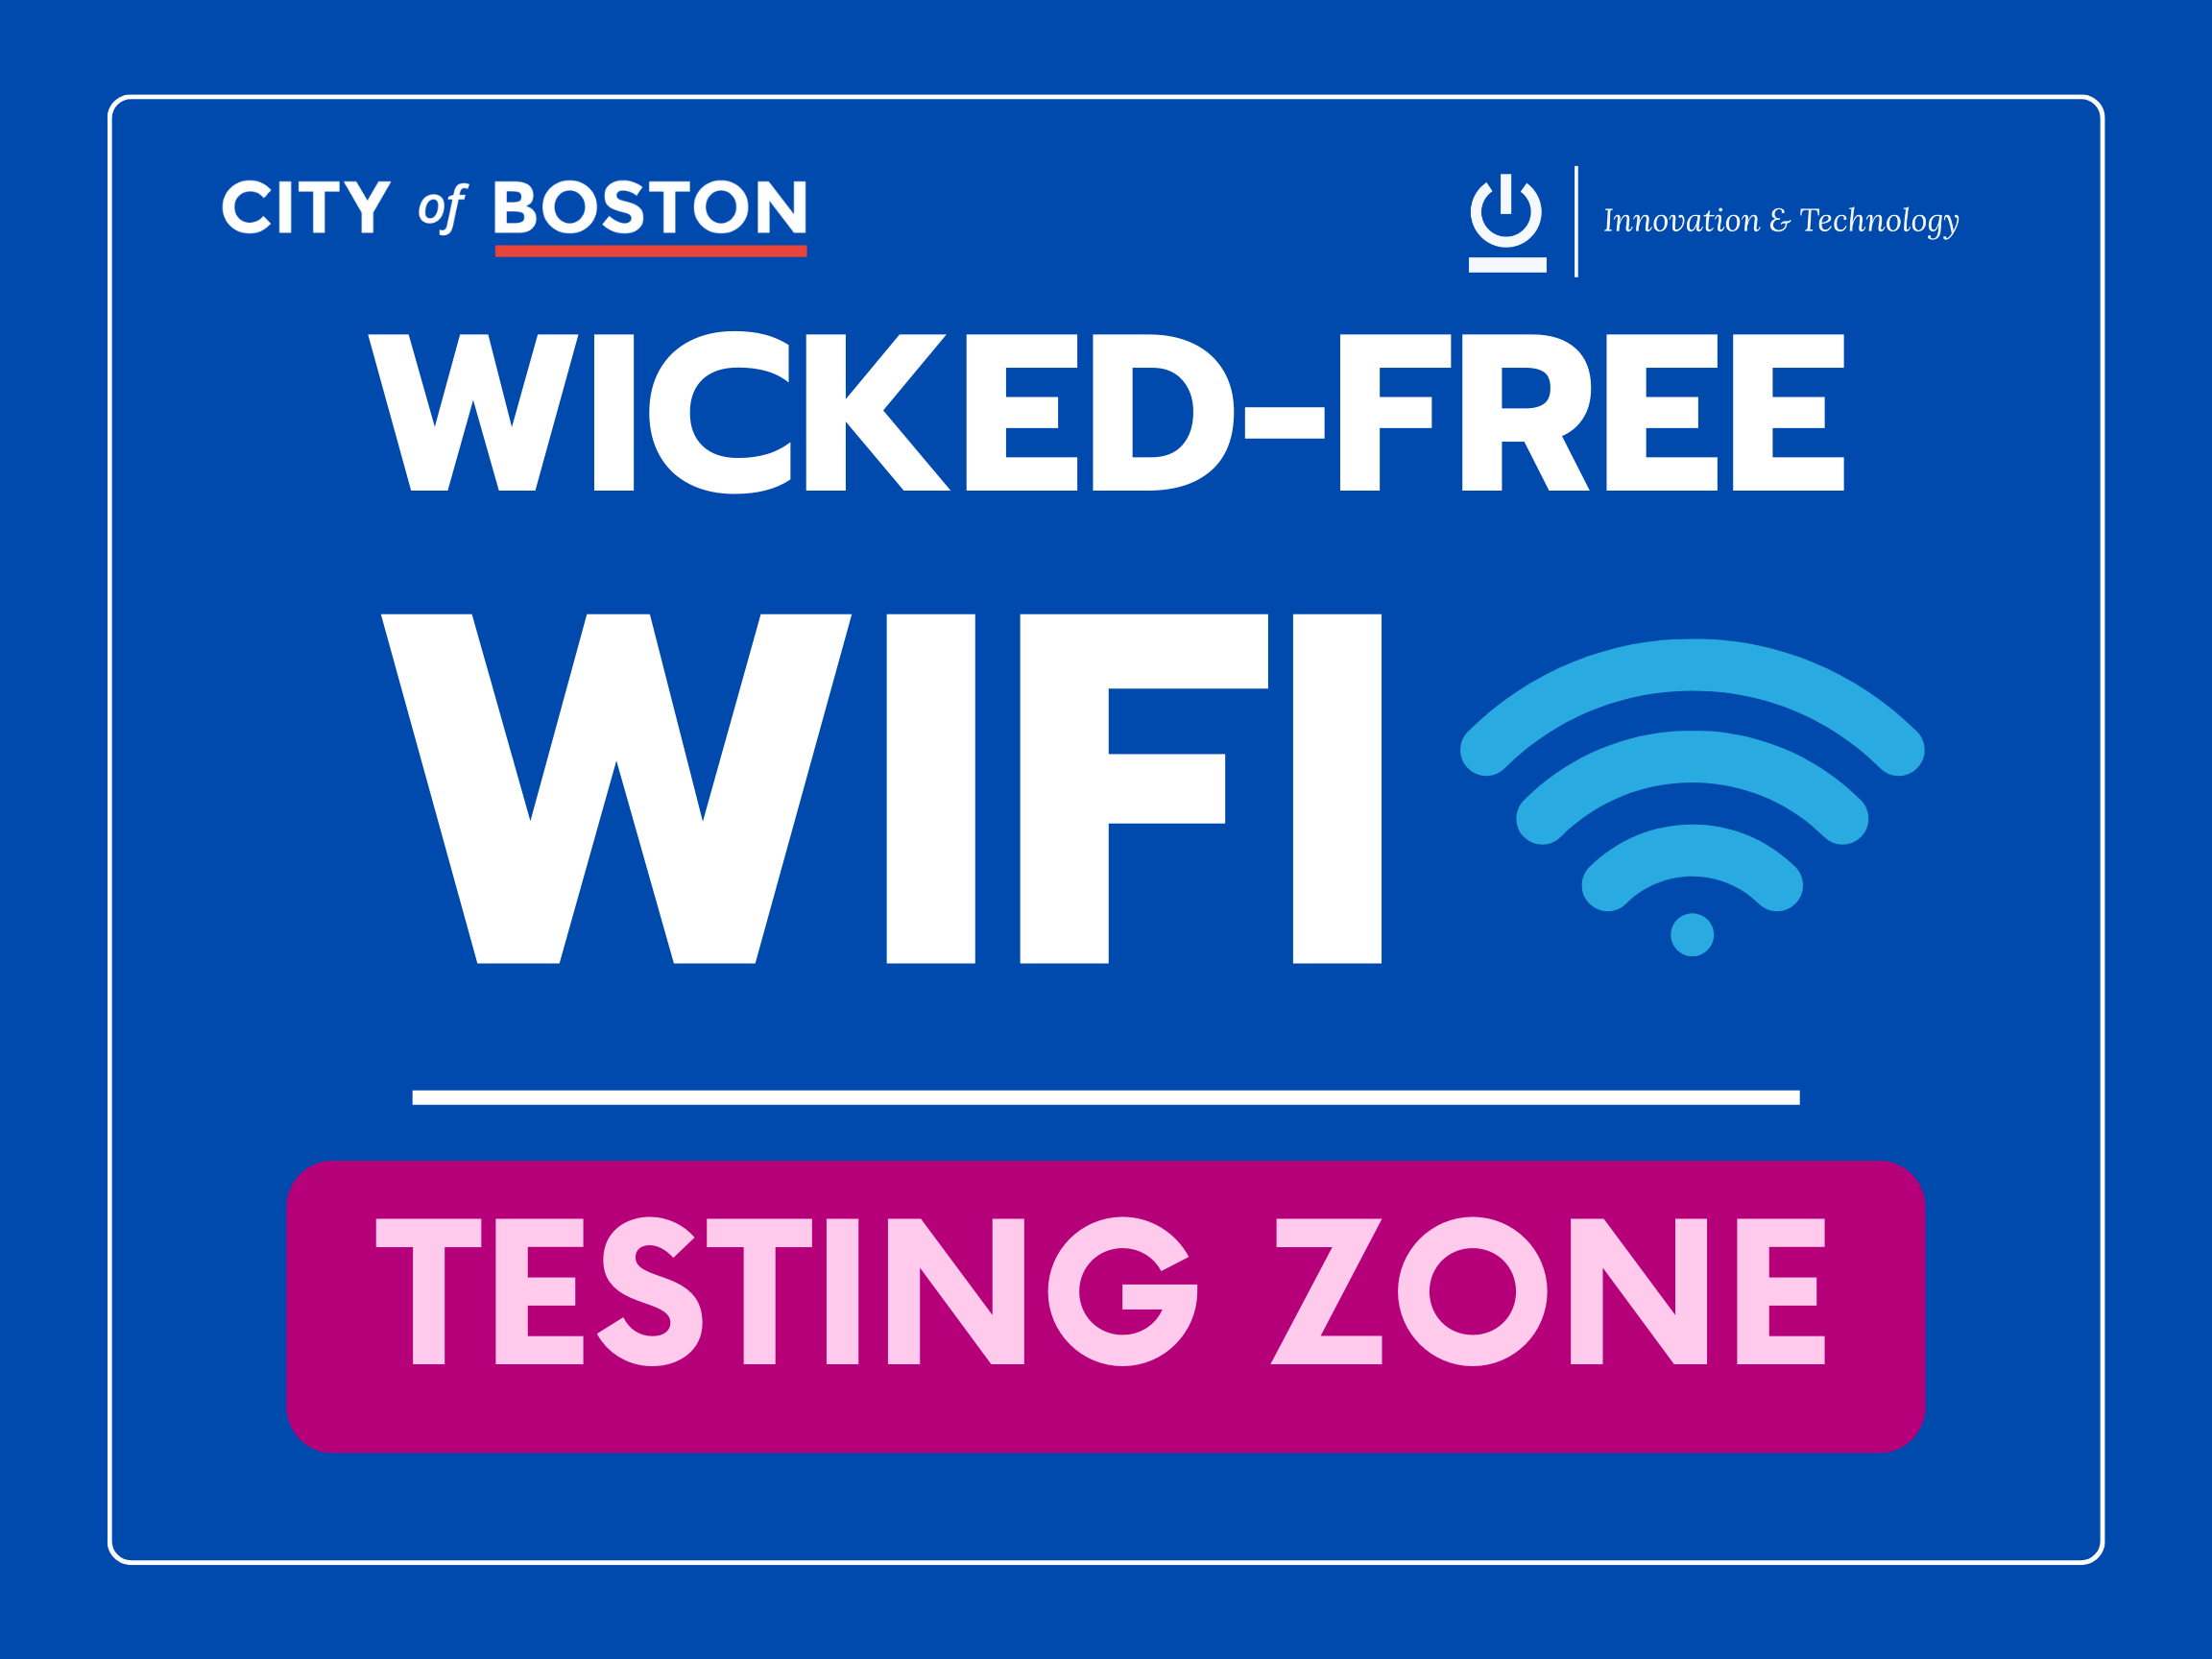 Wicked Free WiFi Expansion Project Testing Zone image